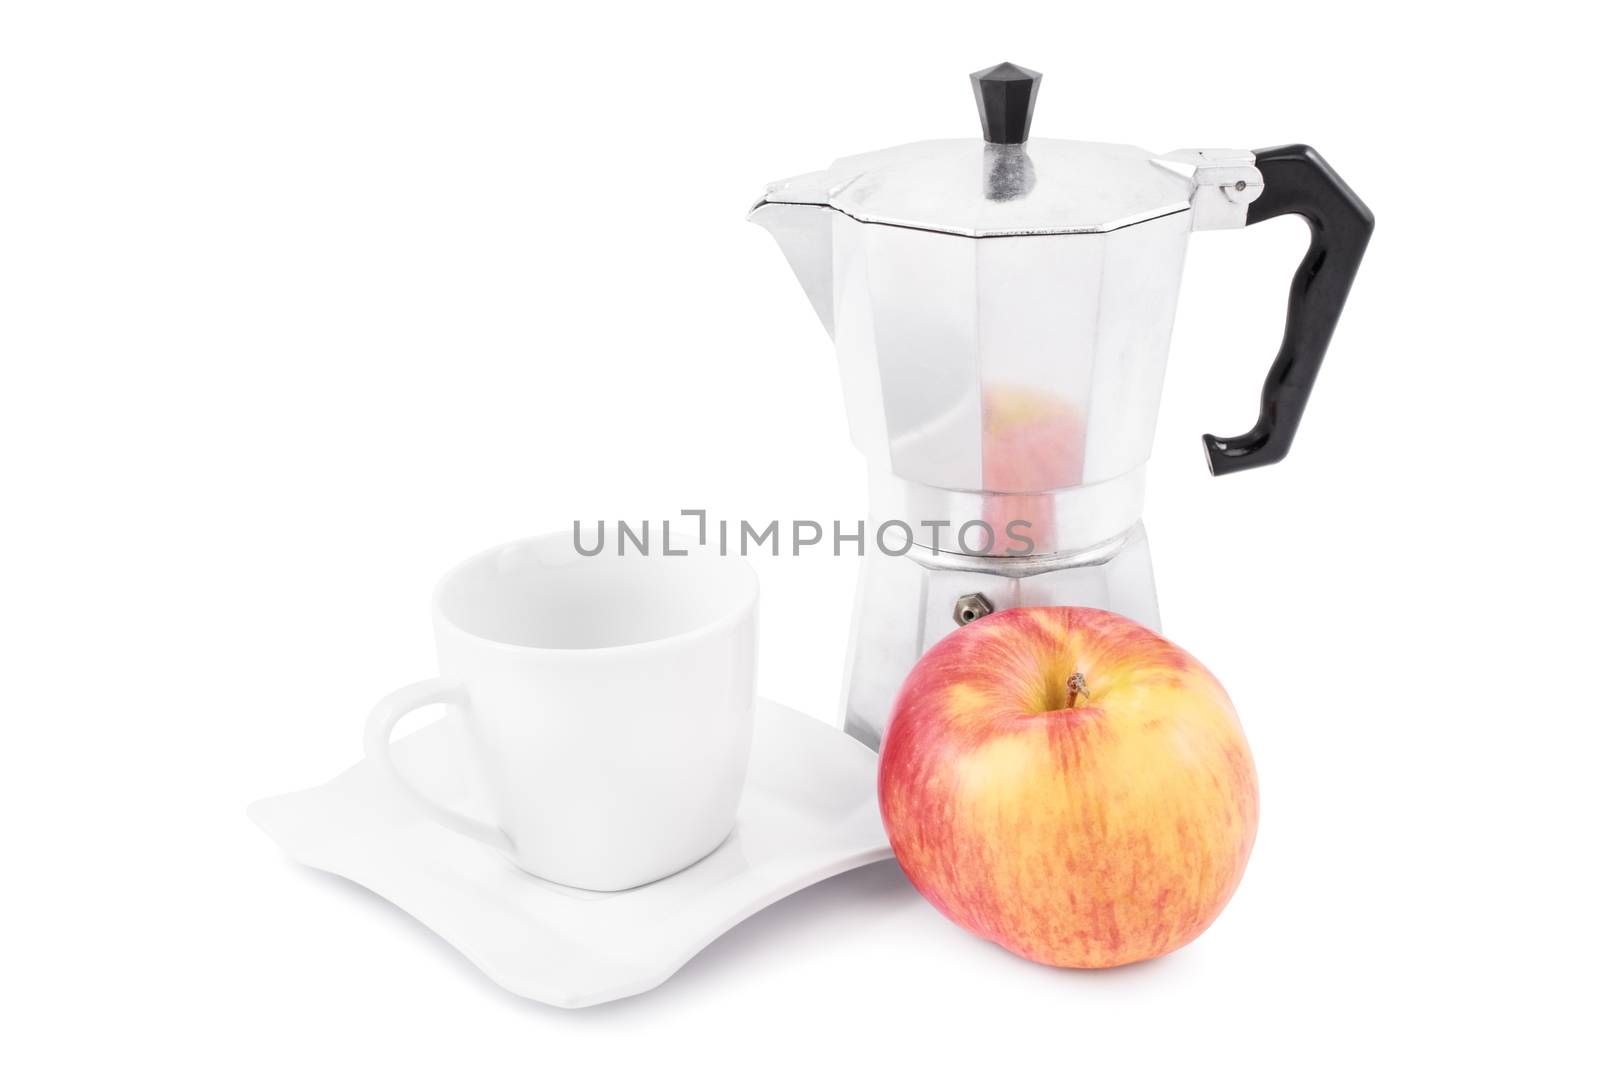 Metallic moka maker, a ceramic cup and an apple, isolated on white background.